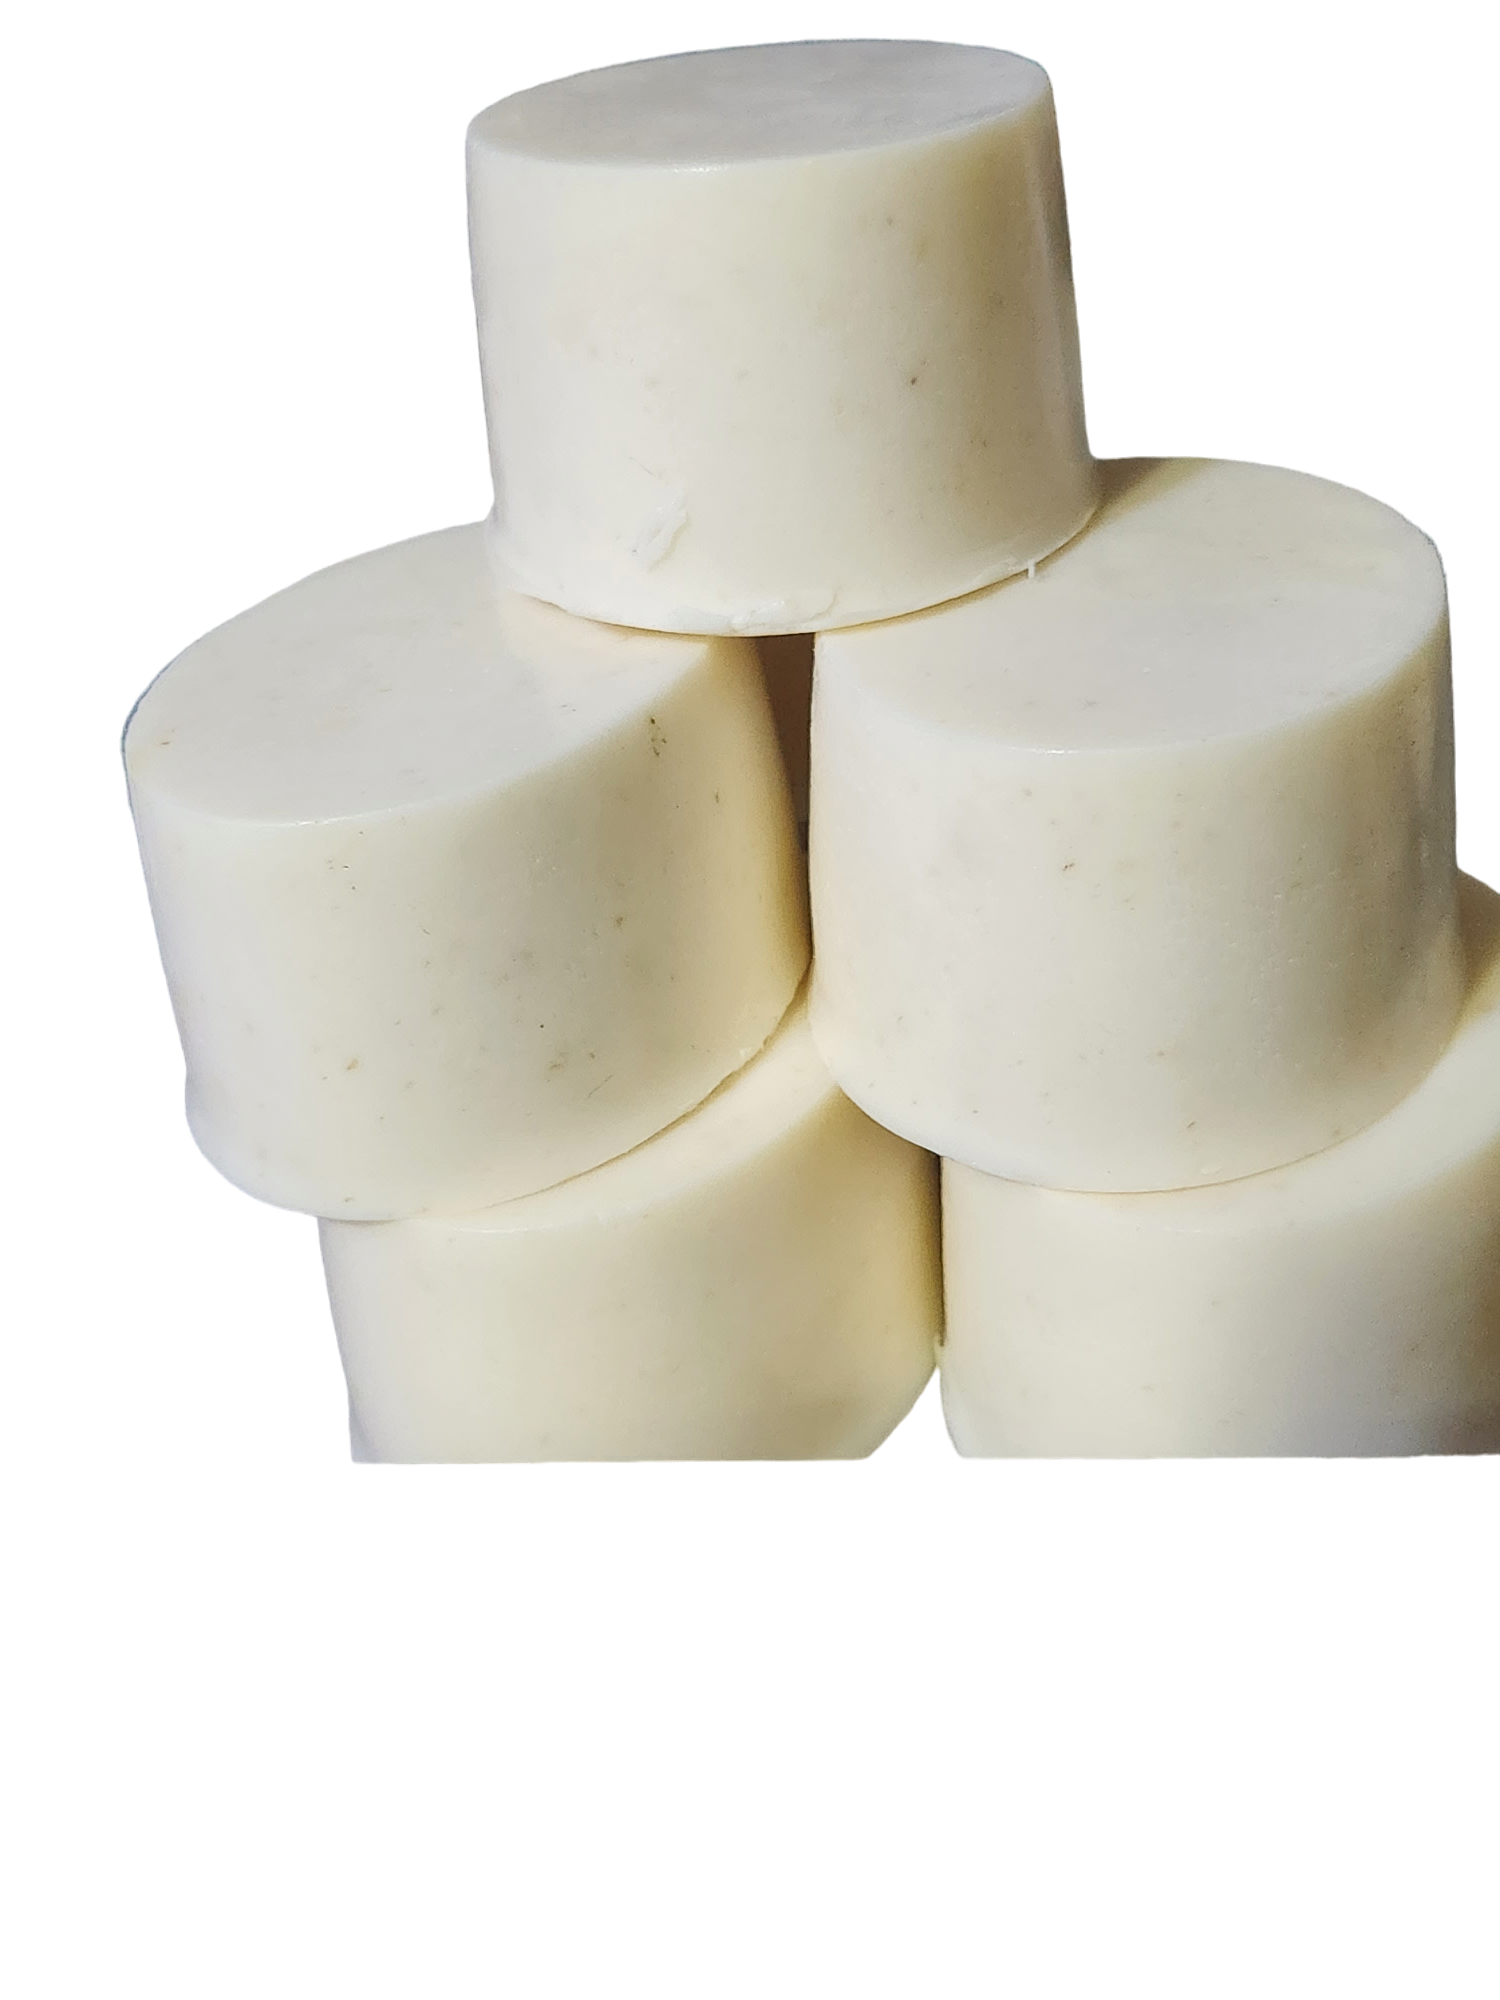 Pure Tallow face & Body soap- Gentle, Soothing Handmade - Unscented grass fed tallow face, body soap, shaving soap